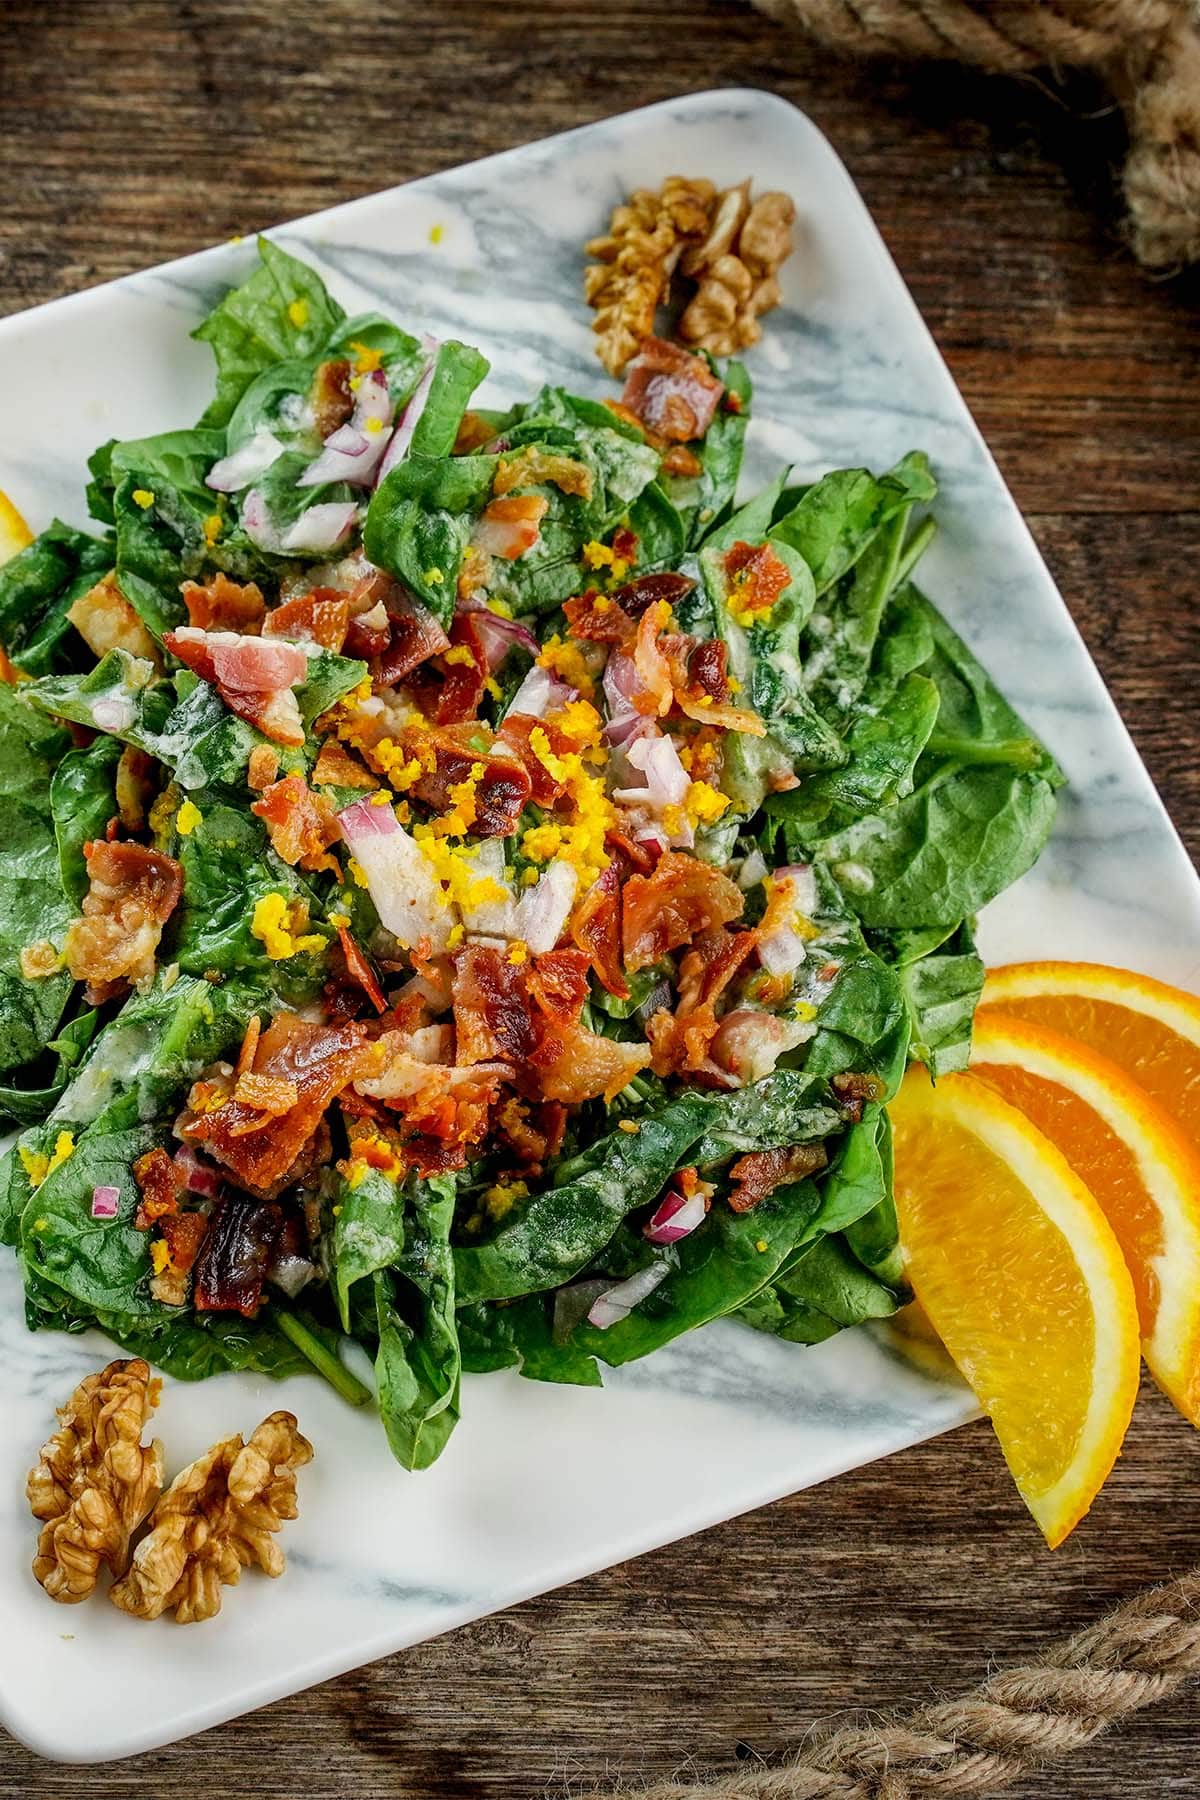 Wilted Spinach salad